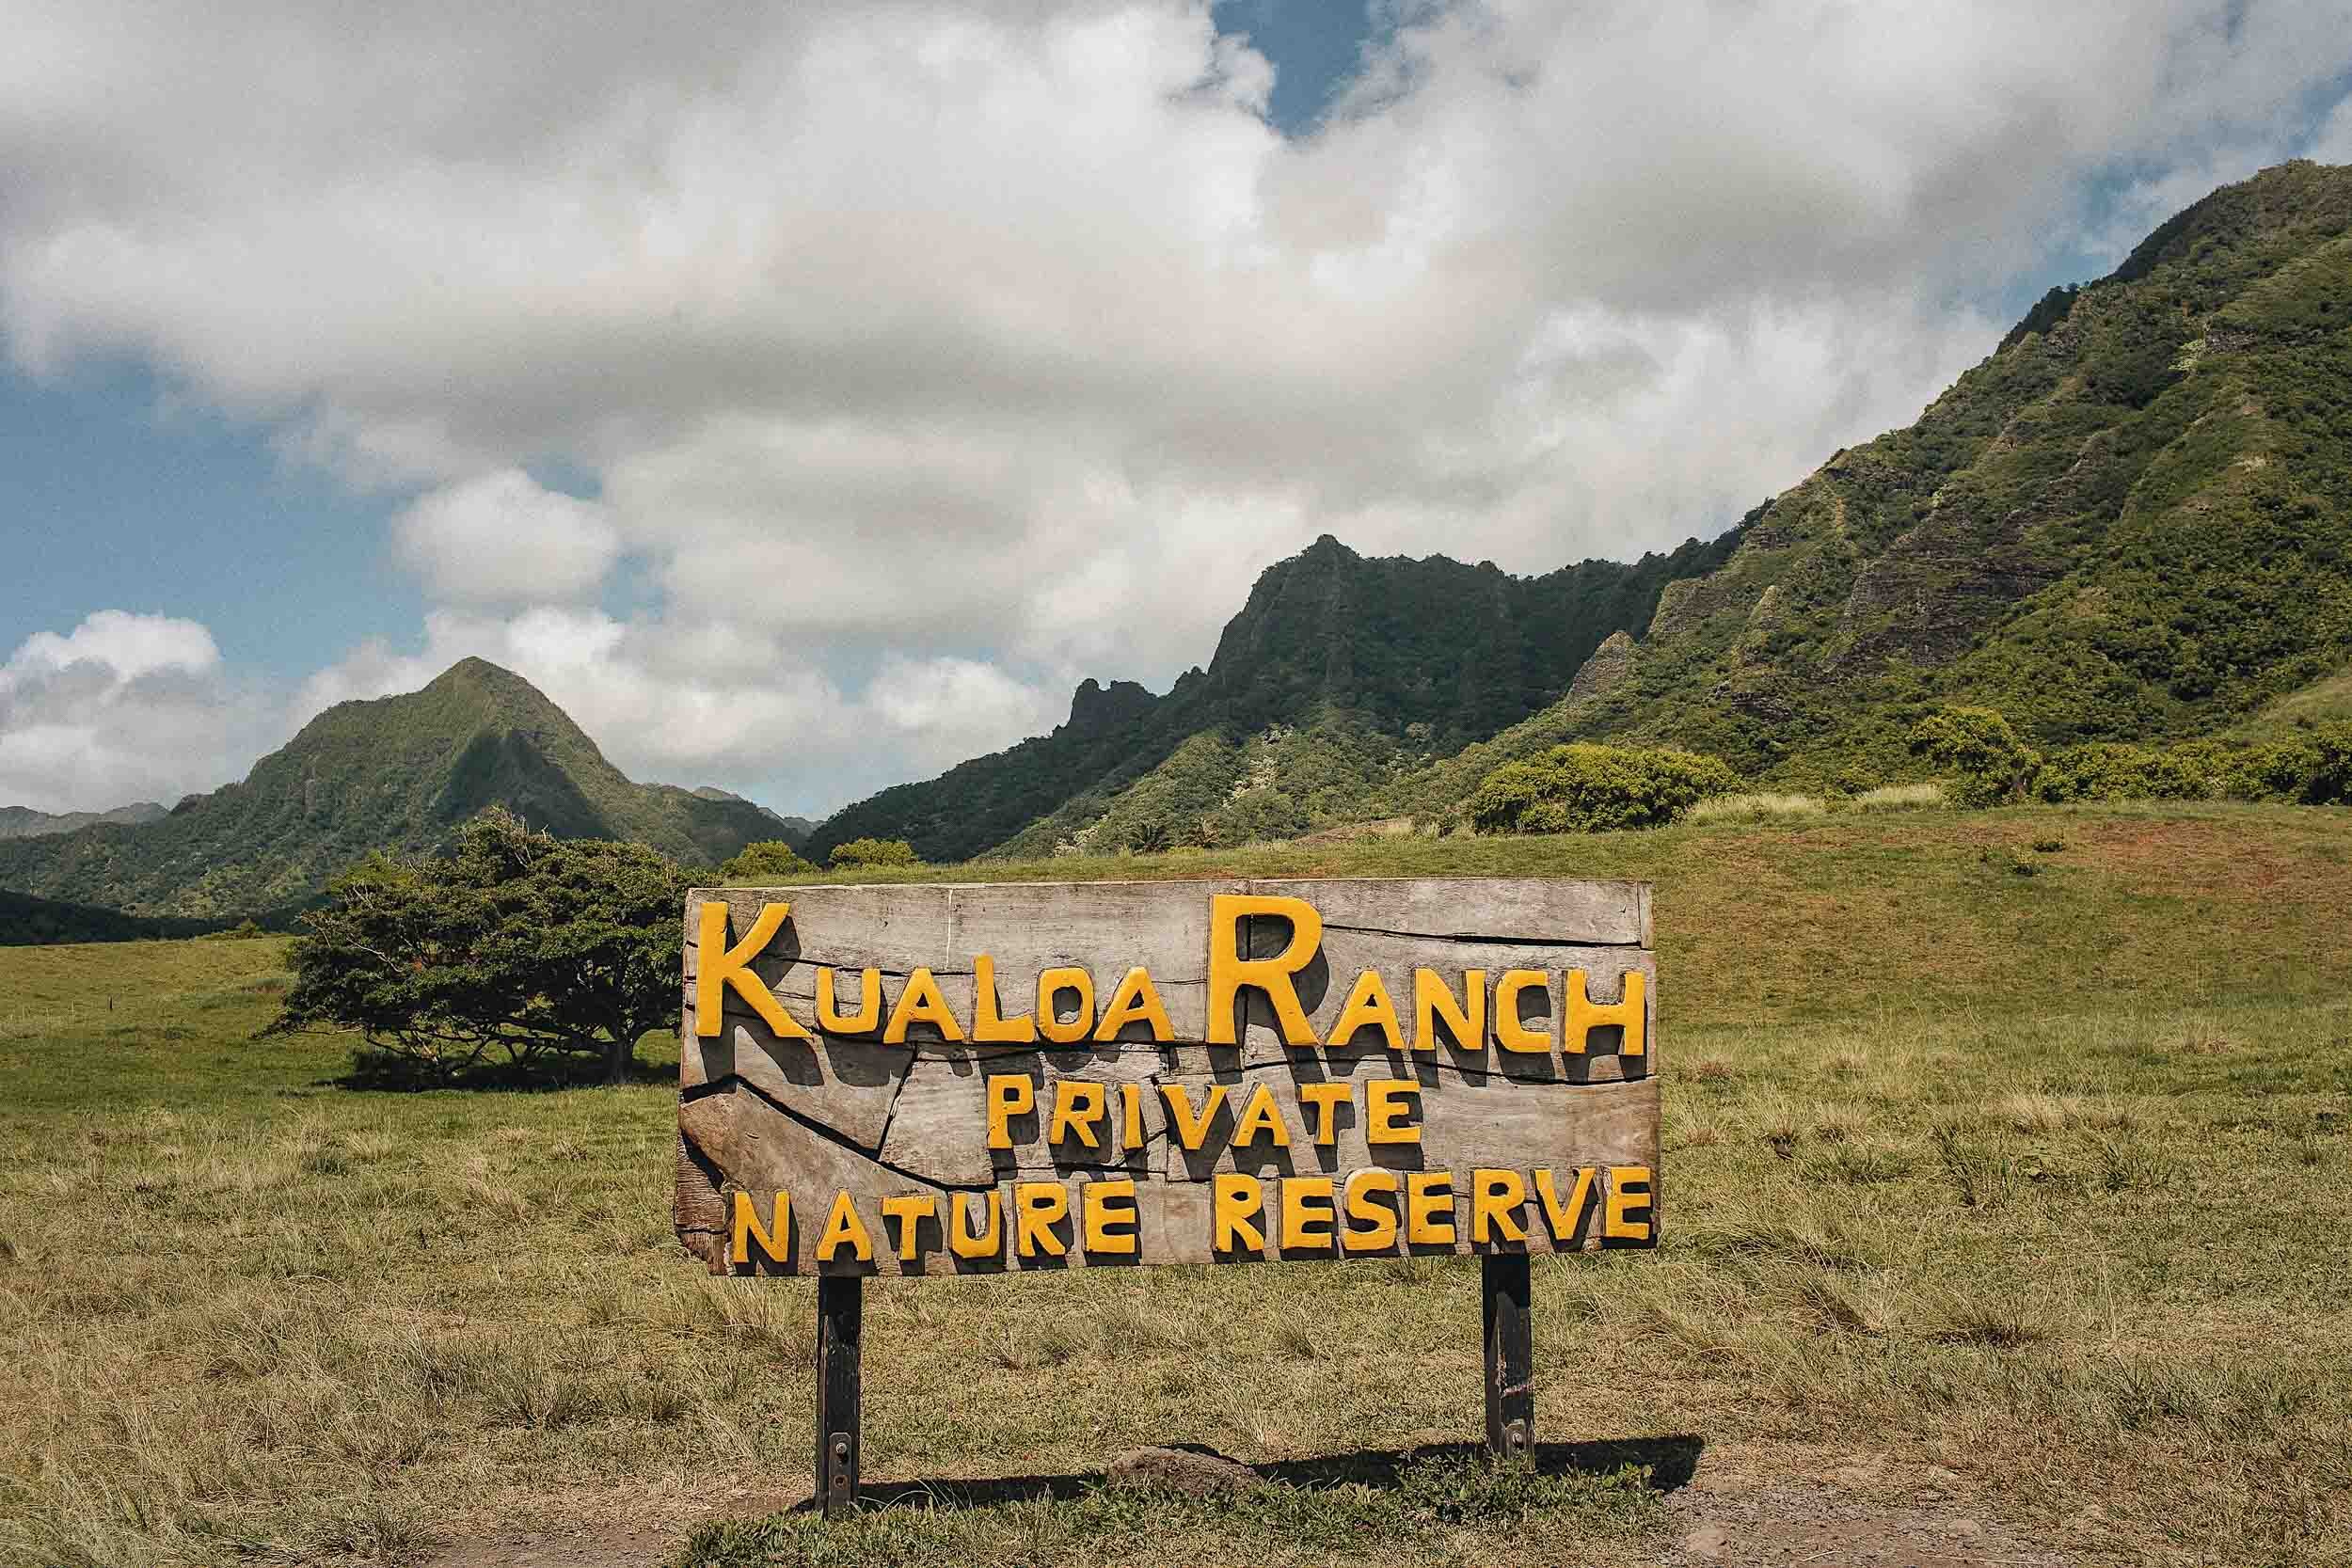 Kualoa Ranch offers many tours and different adventures - don't miss it if you plan to visit Oahu